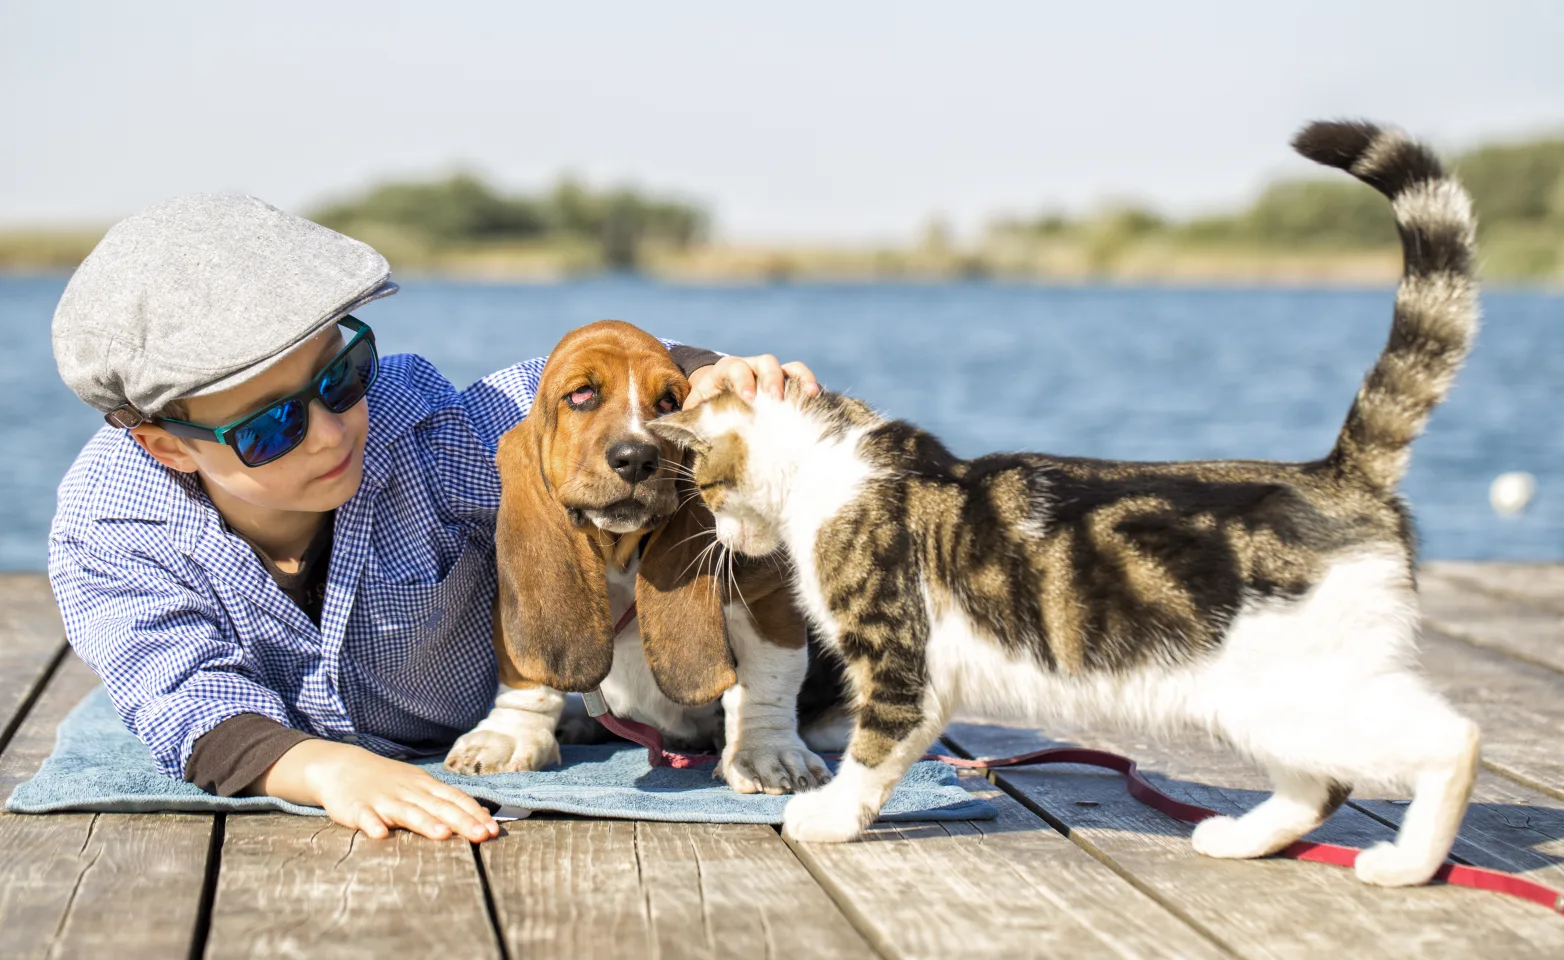 Cat and dog on a dock with a boy